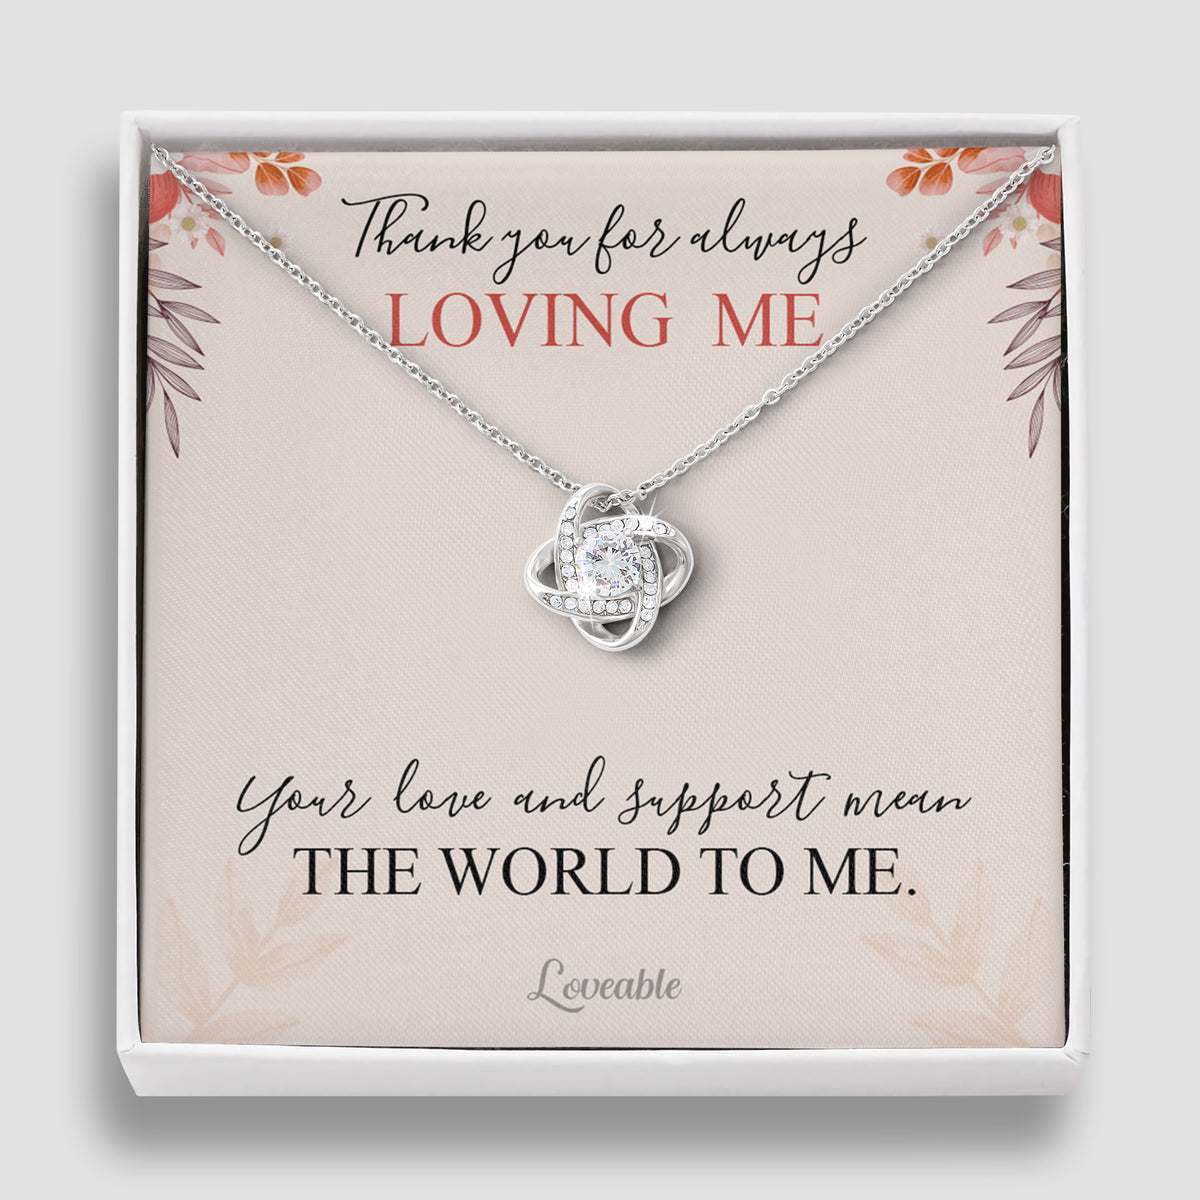 Thank you for always Loving Me - Personalized Necklace